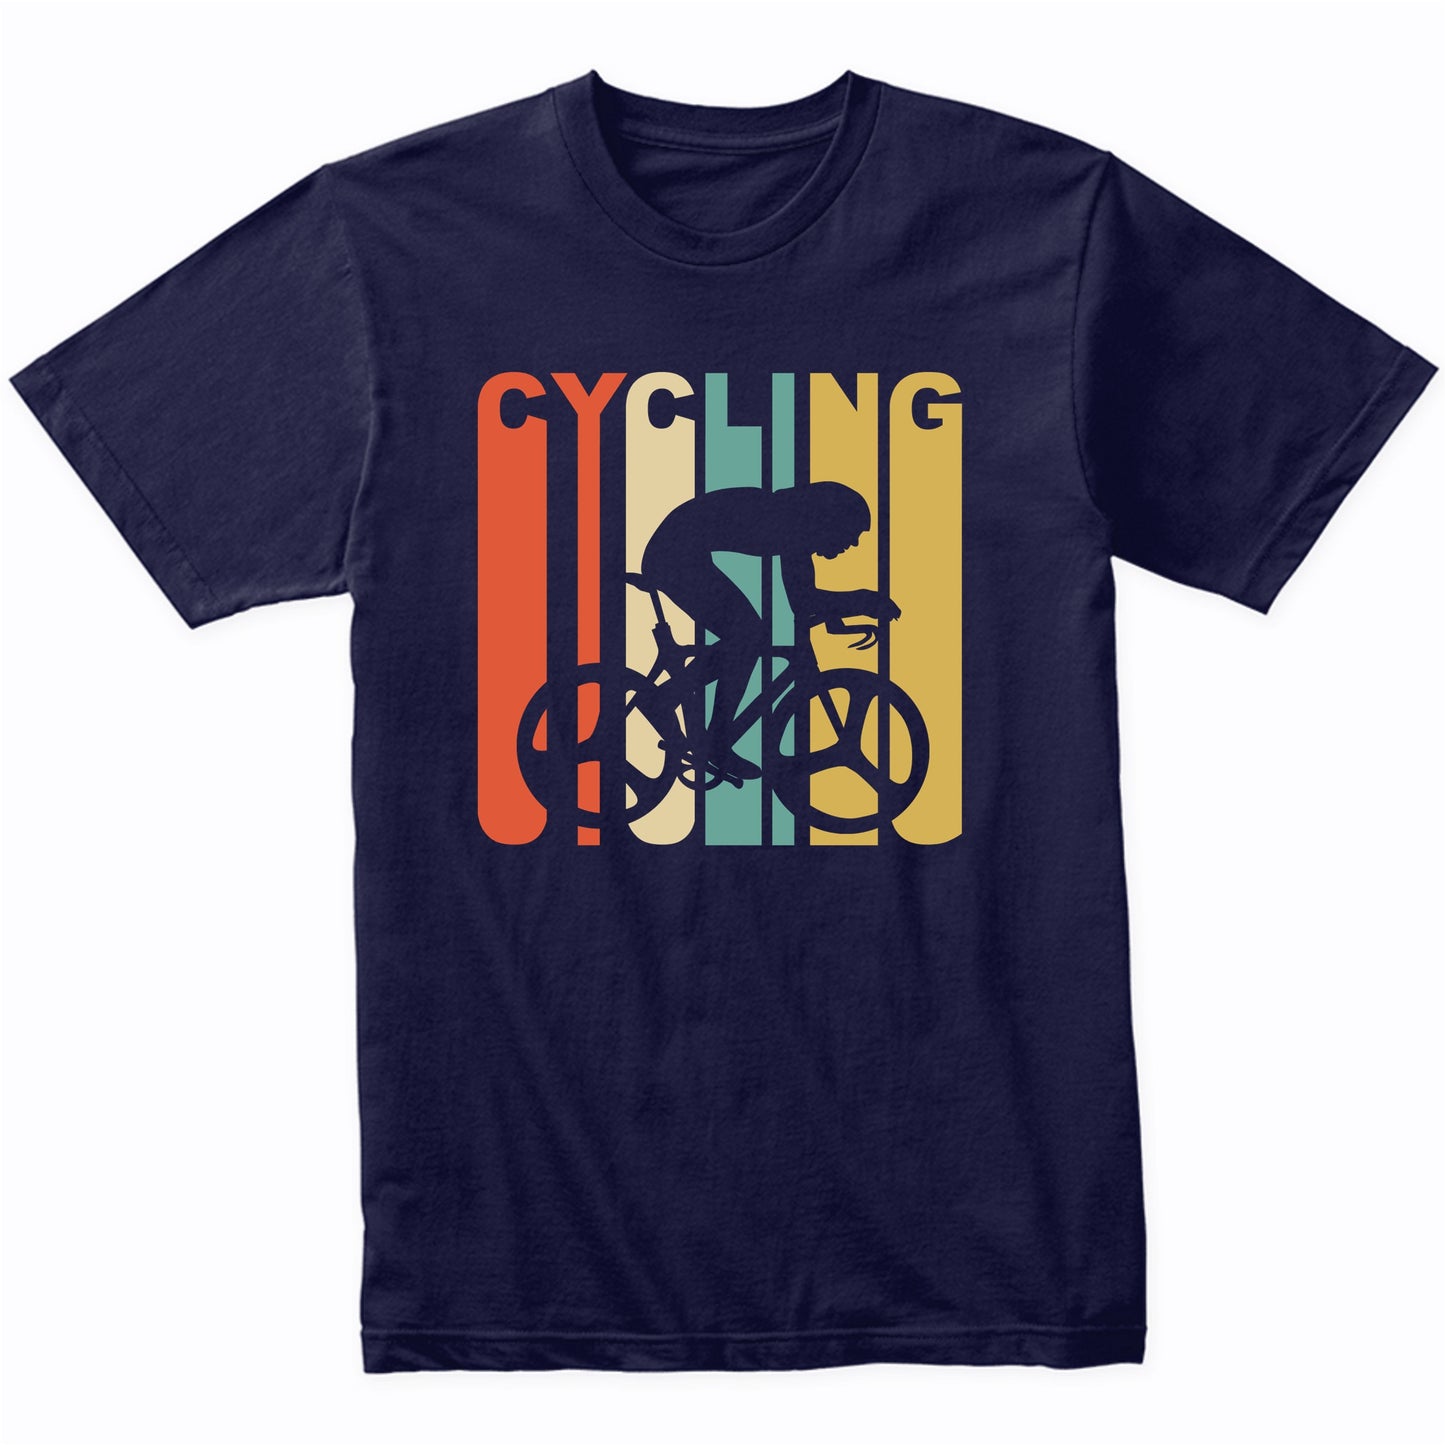 Retro 1970's Style Cyclist Silhouette Cycling T-Shirt